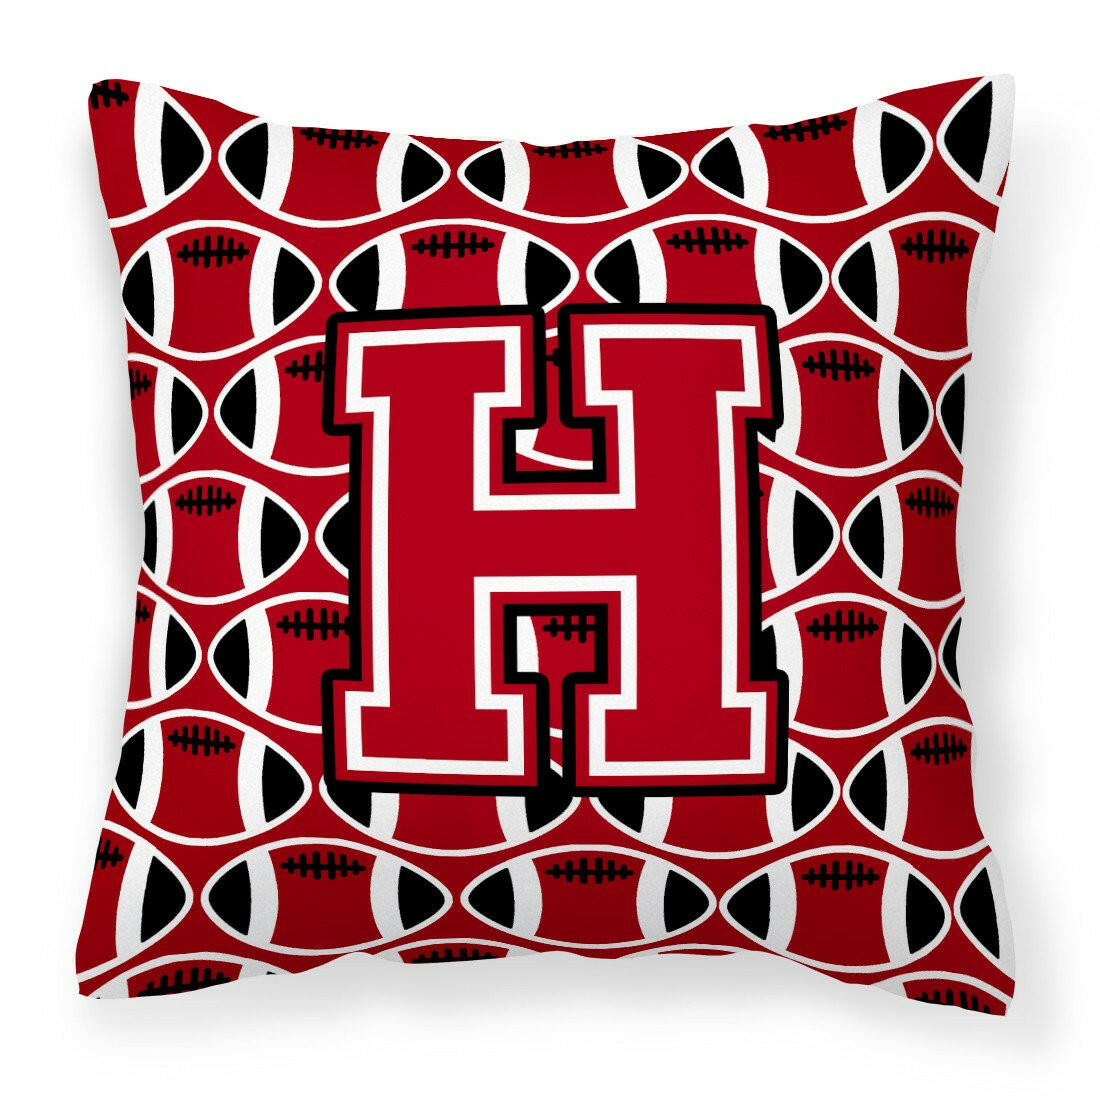 Letter H Football Red, Black and White Fabric Decorative Pillow CJ1073-HPW1414 by Caroline's Treasures